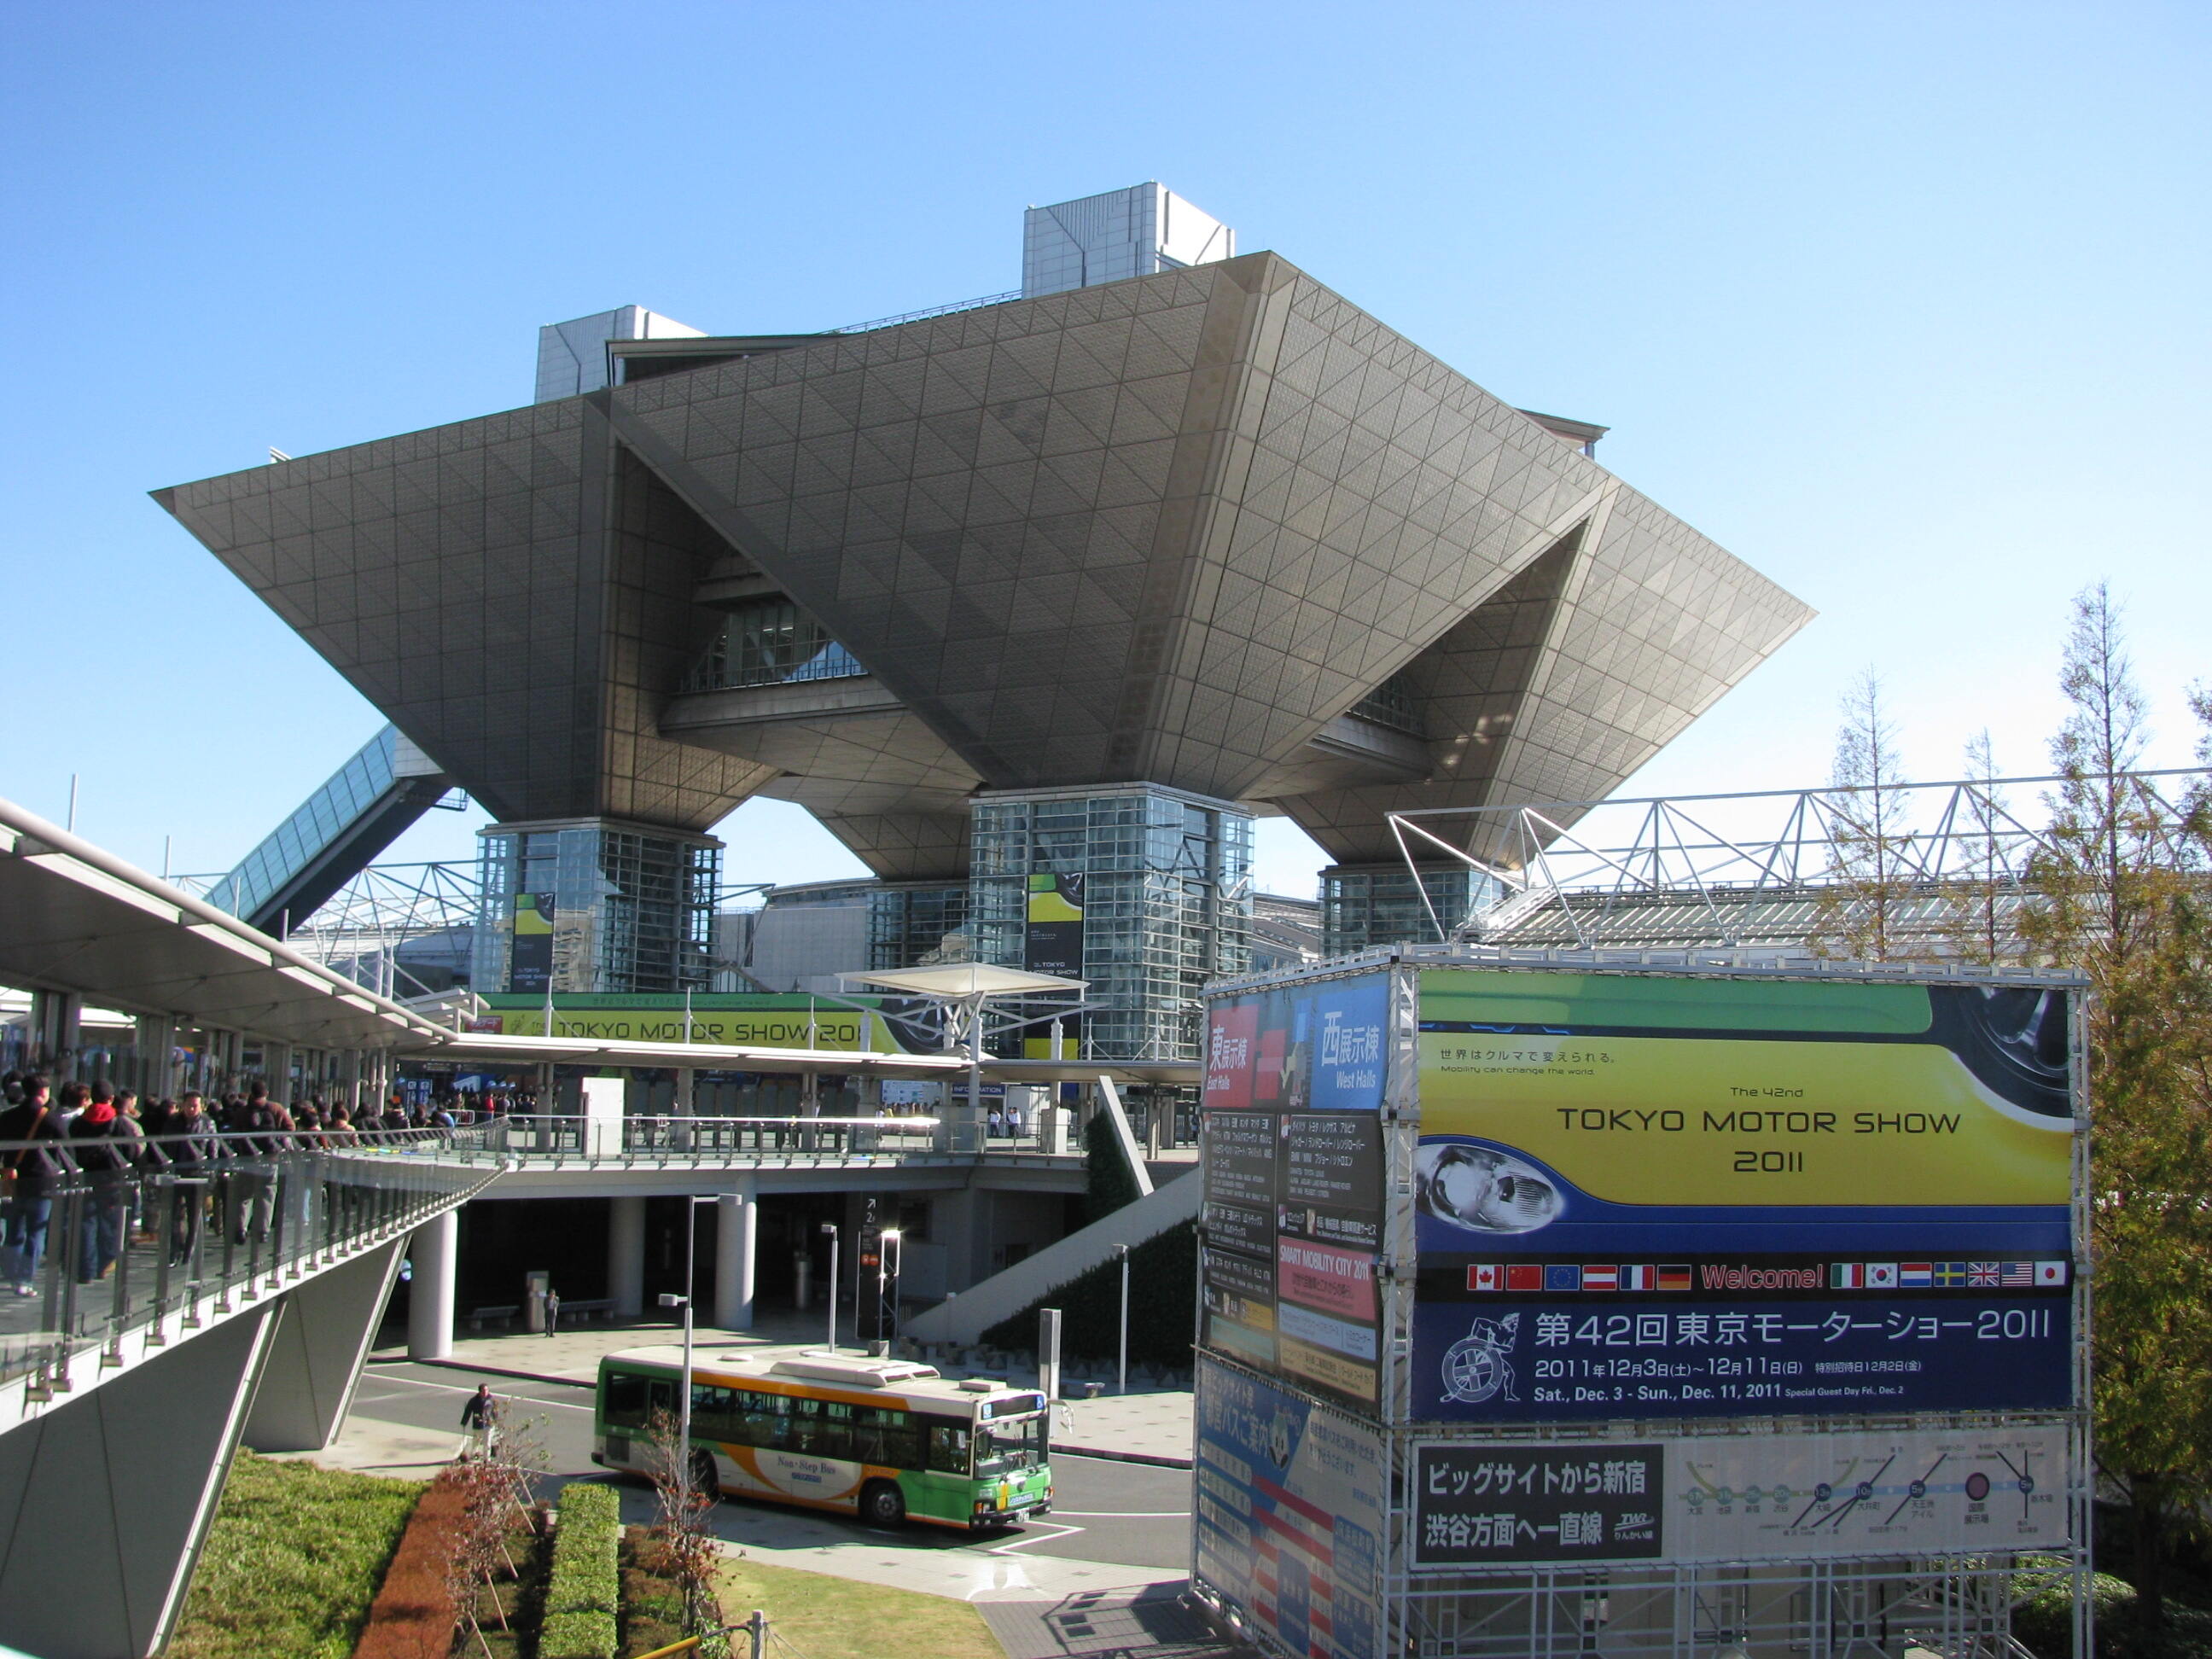 The Tokyo Big Sight. This place is in Ariake, Koto, Tokyo, Japan.